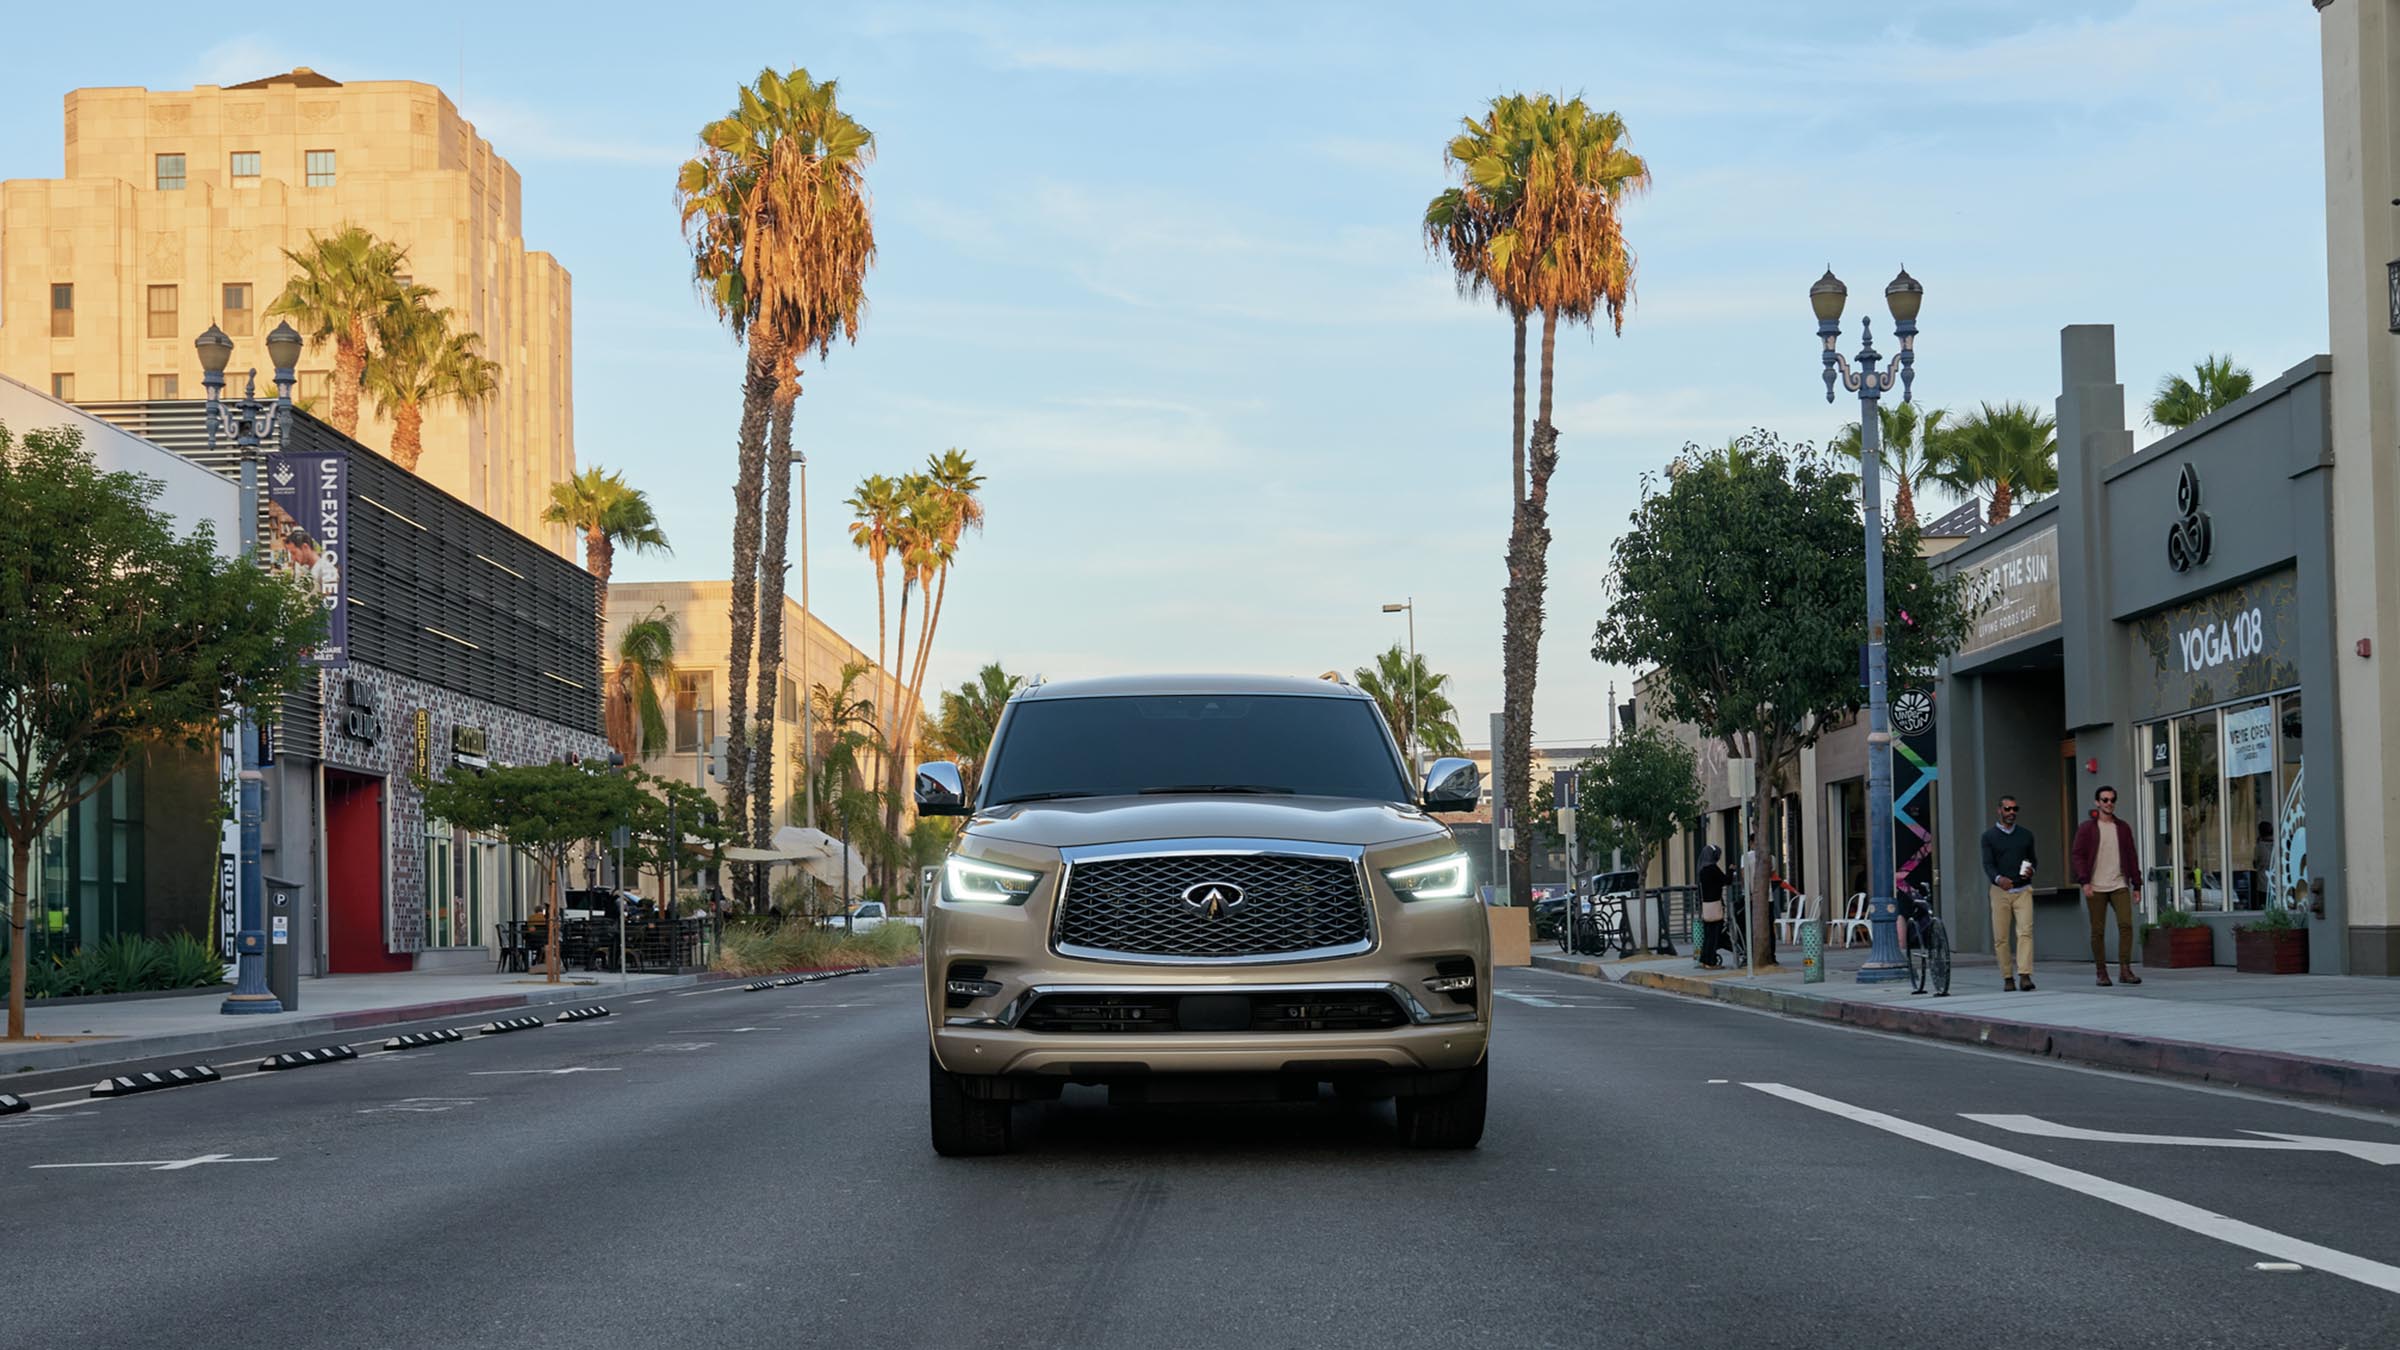 A beige 2022 INFINITI QX80 SUV driving down a street with palm trees and shops.